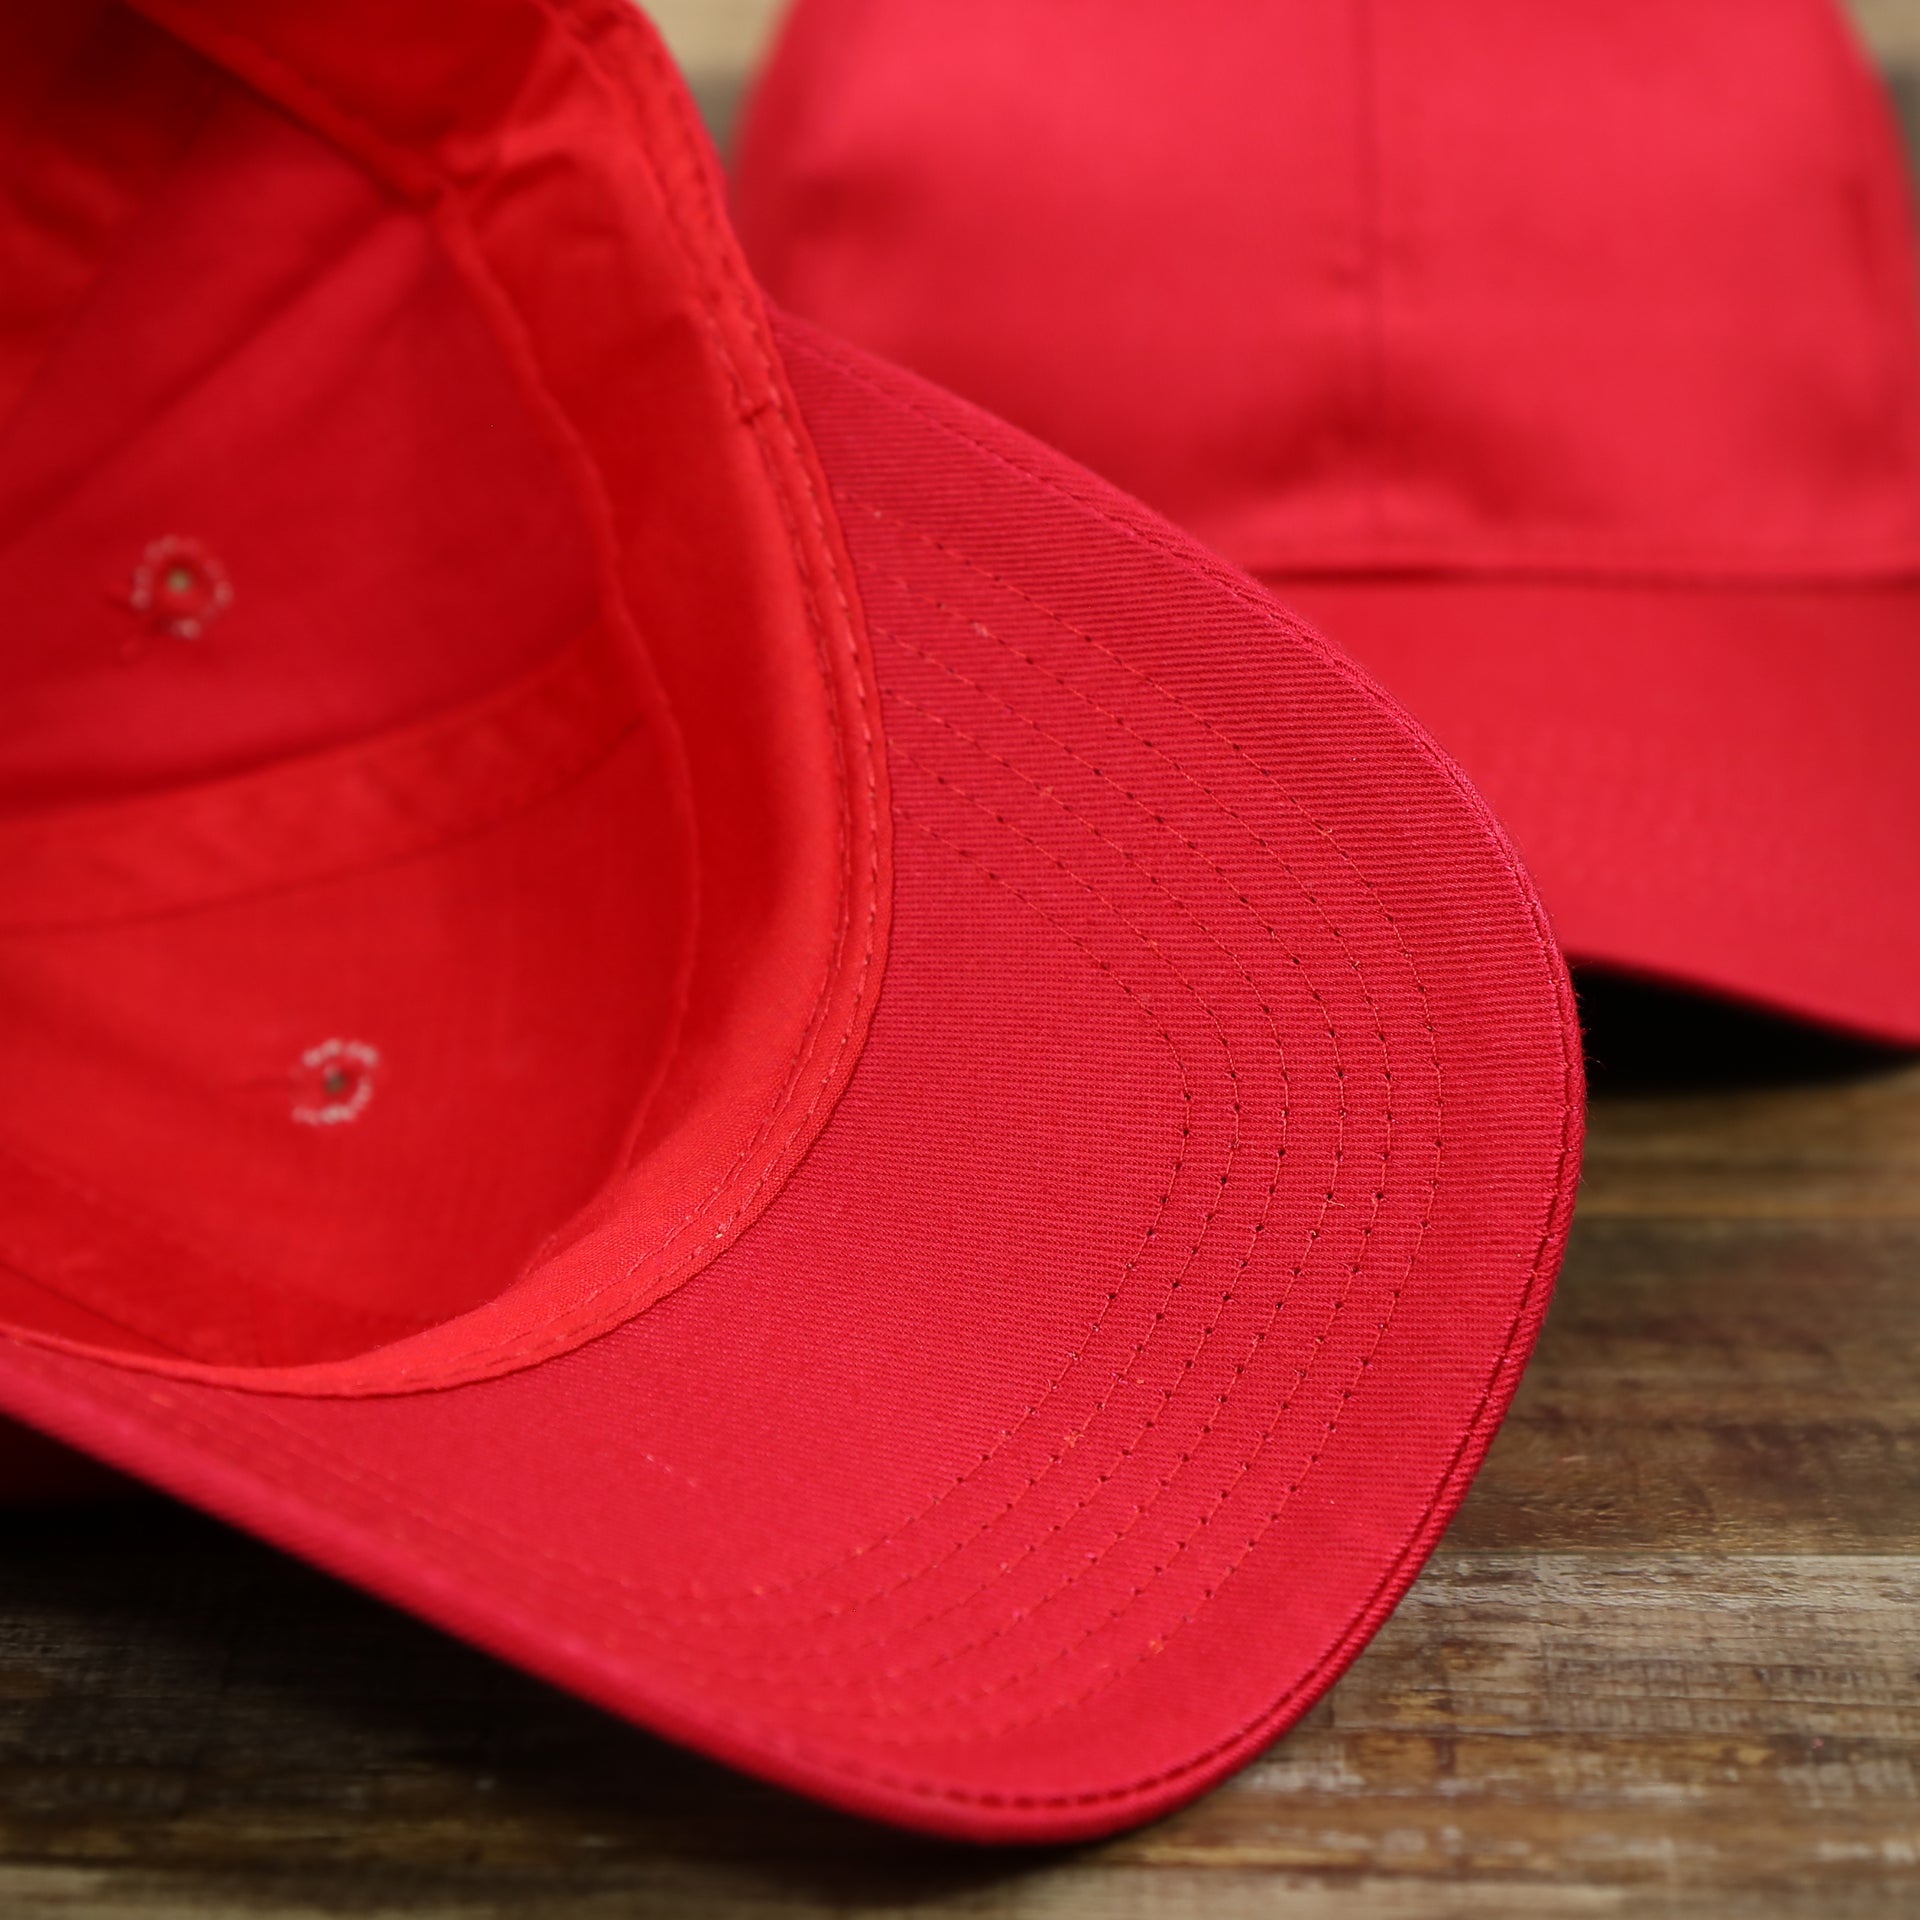 The undervisor on the Youth Cardinal Red Flat Brim Blank Baseball Hat | Kid’s Red Dad Hat